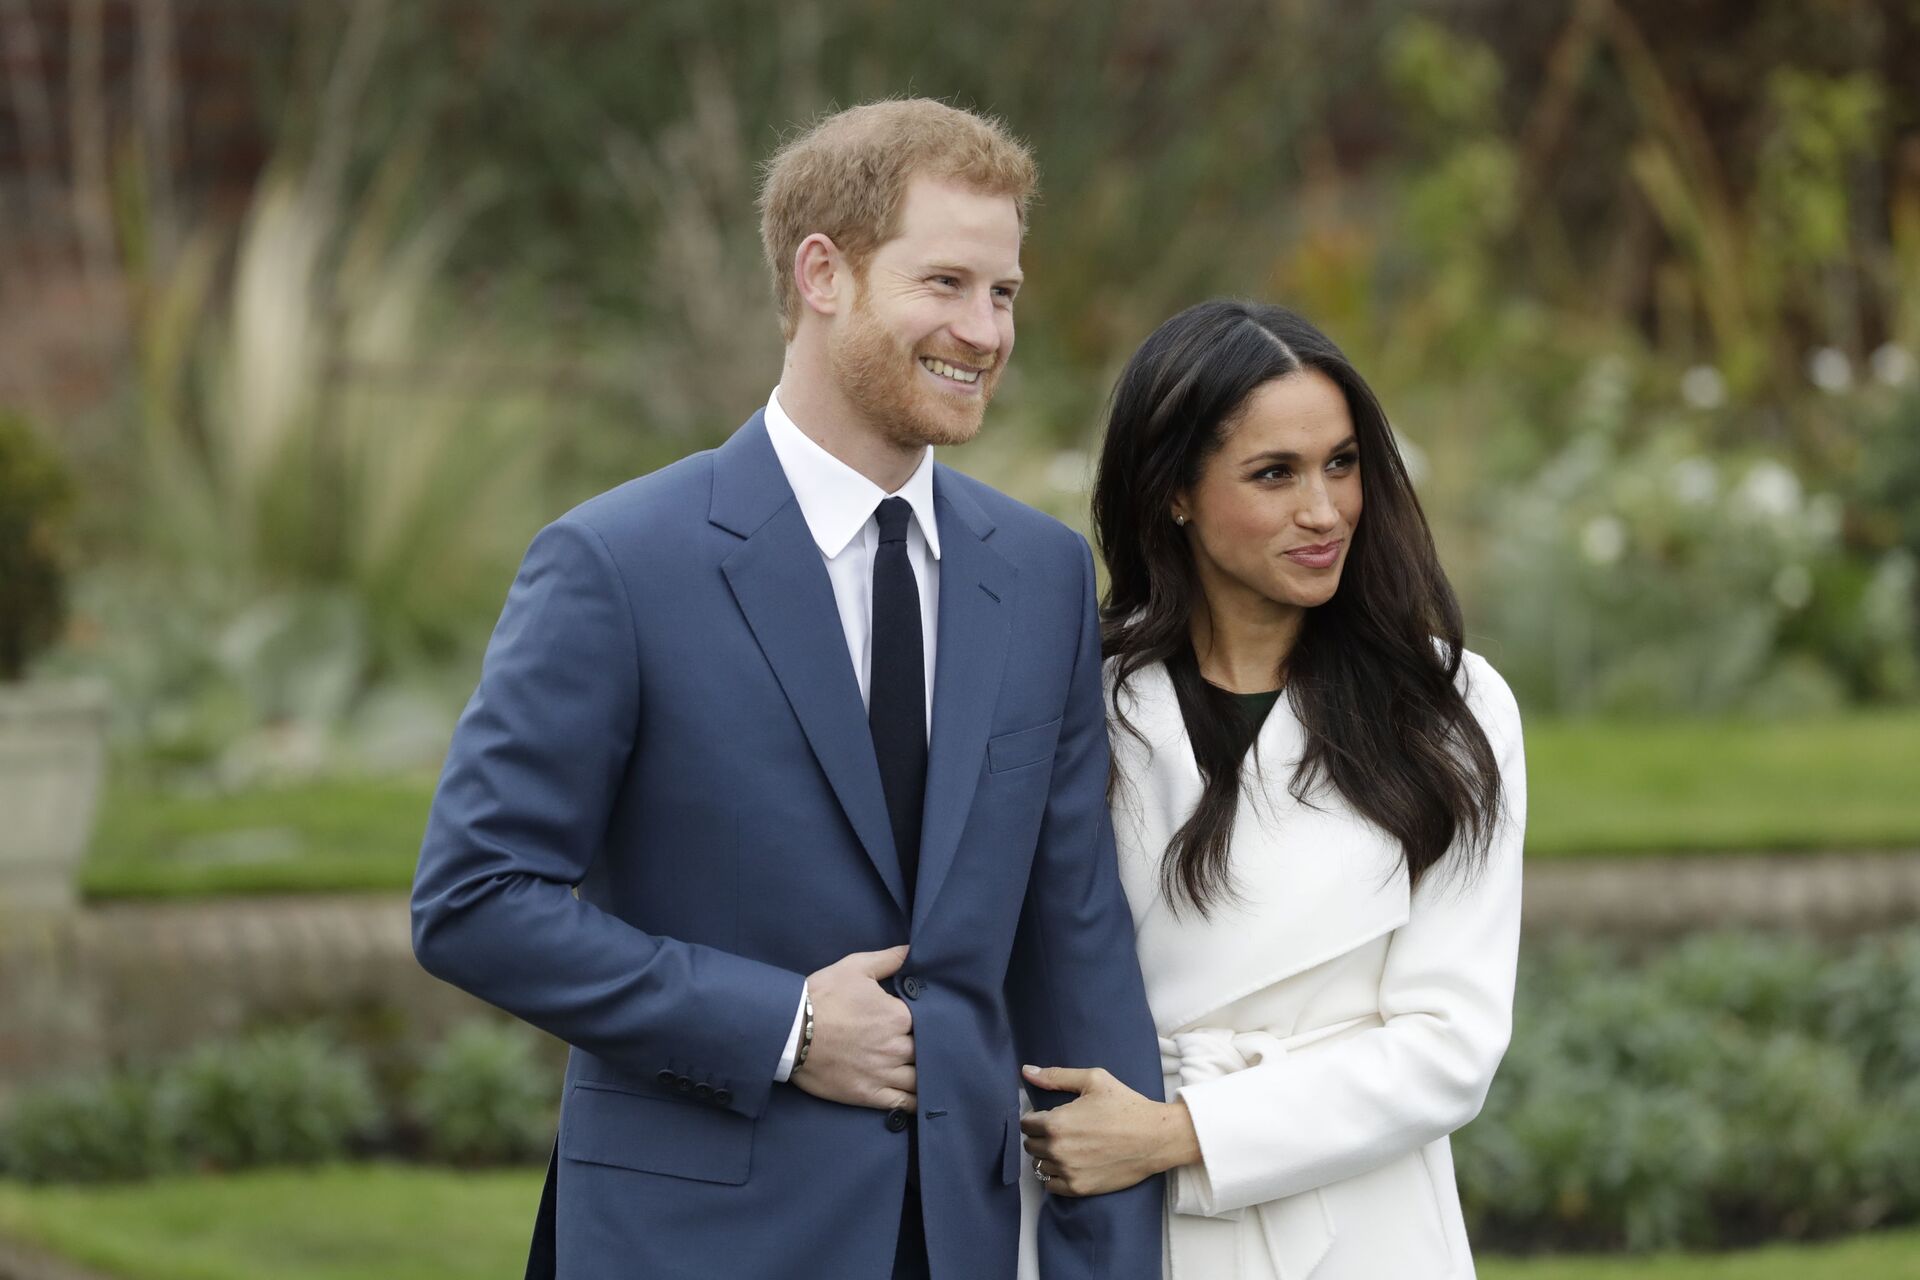 Britain's Prince Harry and his fiancee Meghan Markle pose for photographers during a photocall in the grounds of Kensington Palace in London, Monday Nov. 27, 2017 - Sputnik International, 1920, 14.11.2021